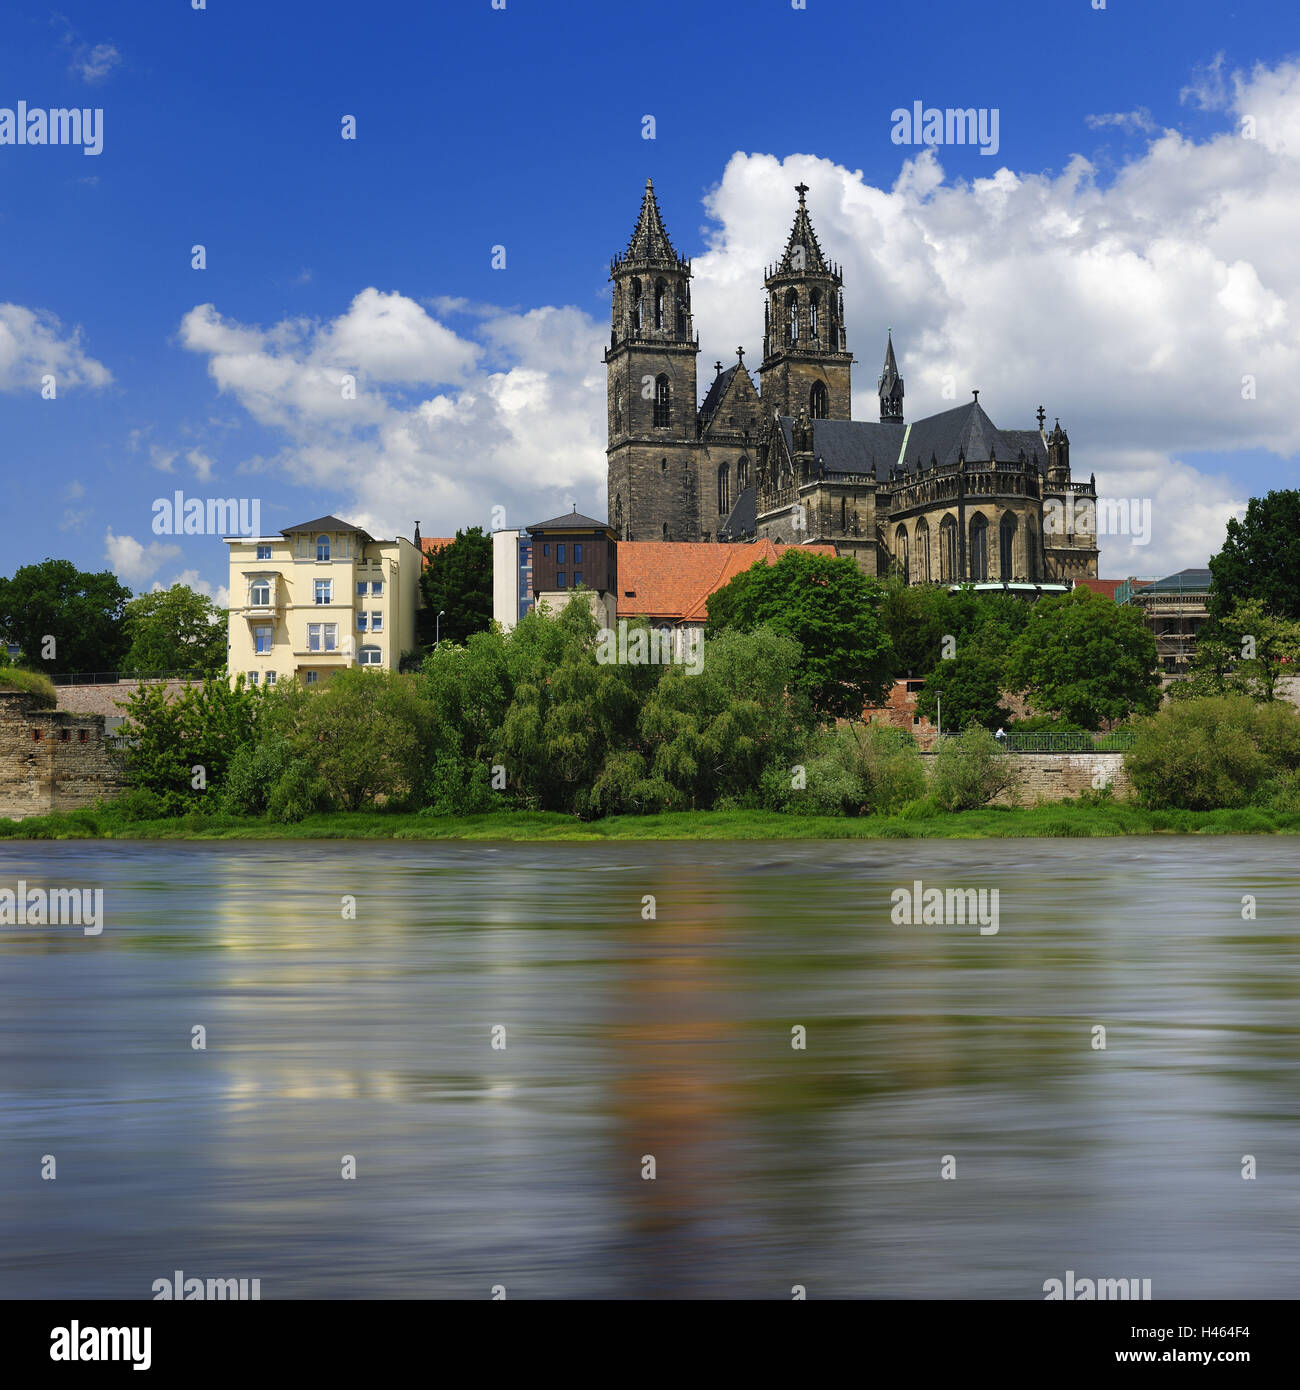 Germany, Saxony-Anhalt, Magdeburg, cathedral, river Elbe, Stock Photo